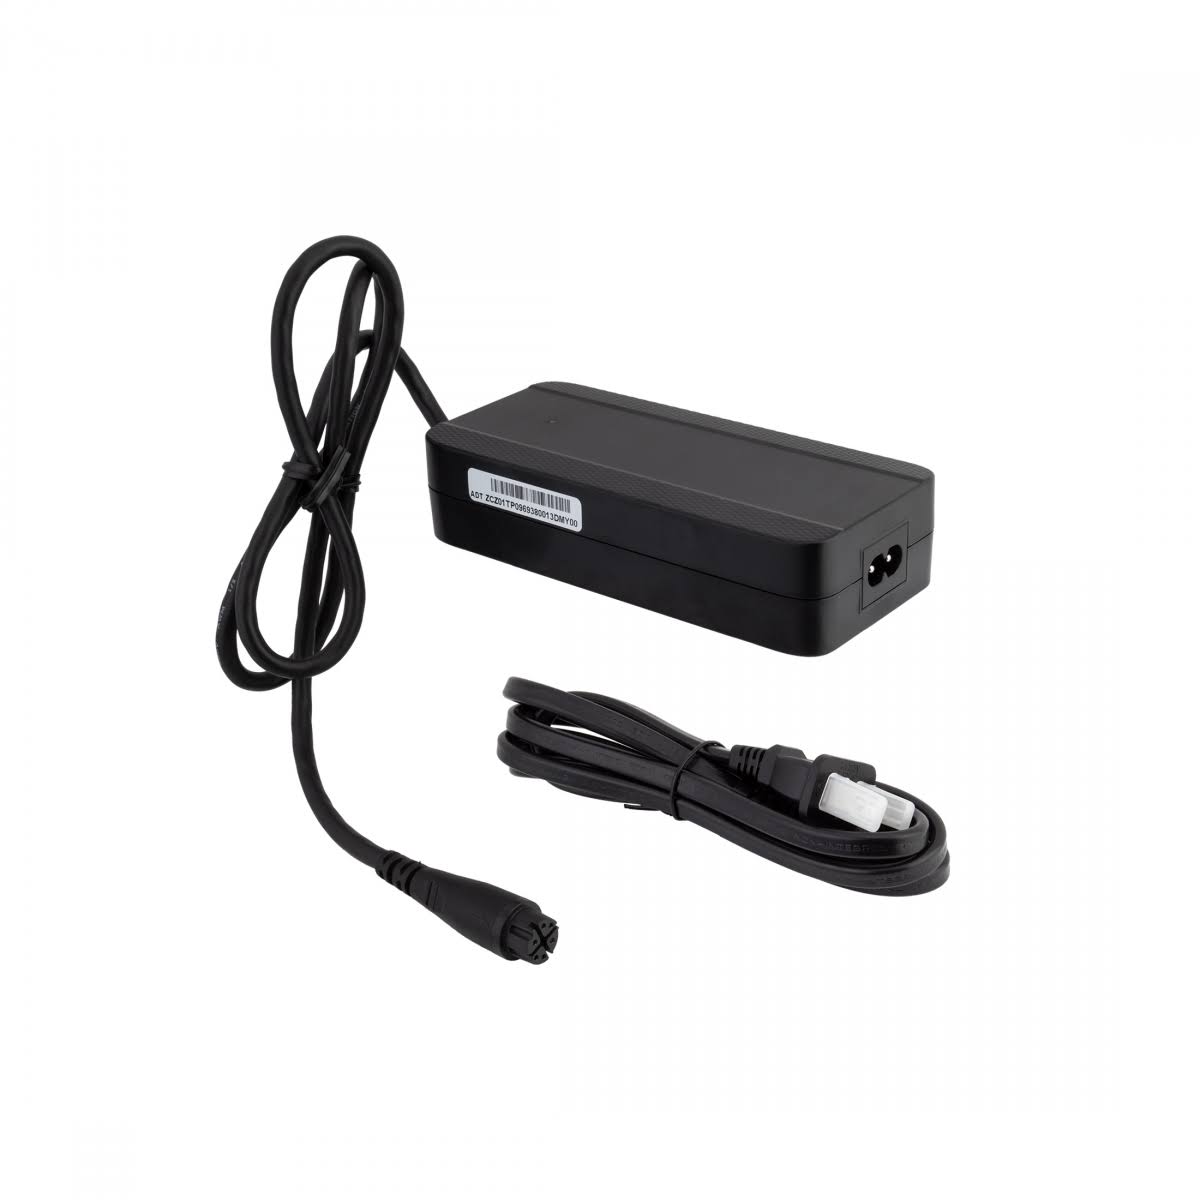 Sun Bicycles E350 Trike Battery Charger, 36V